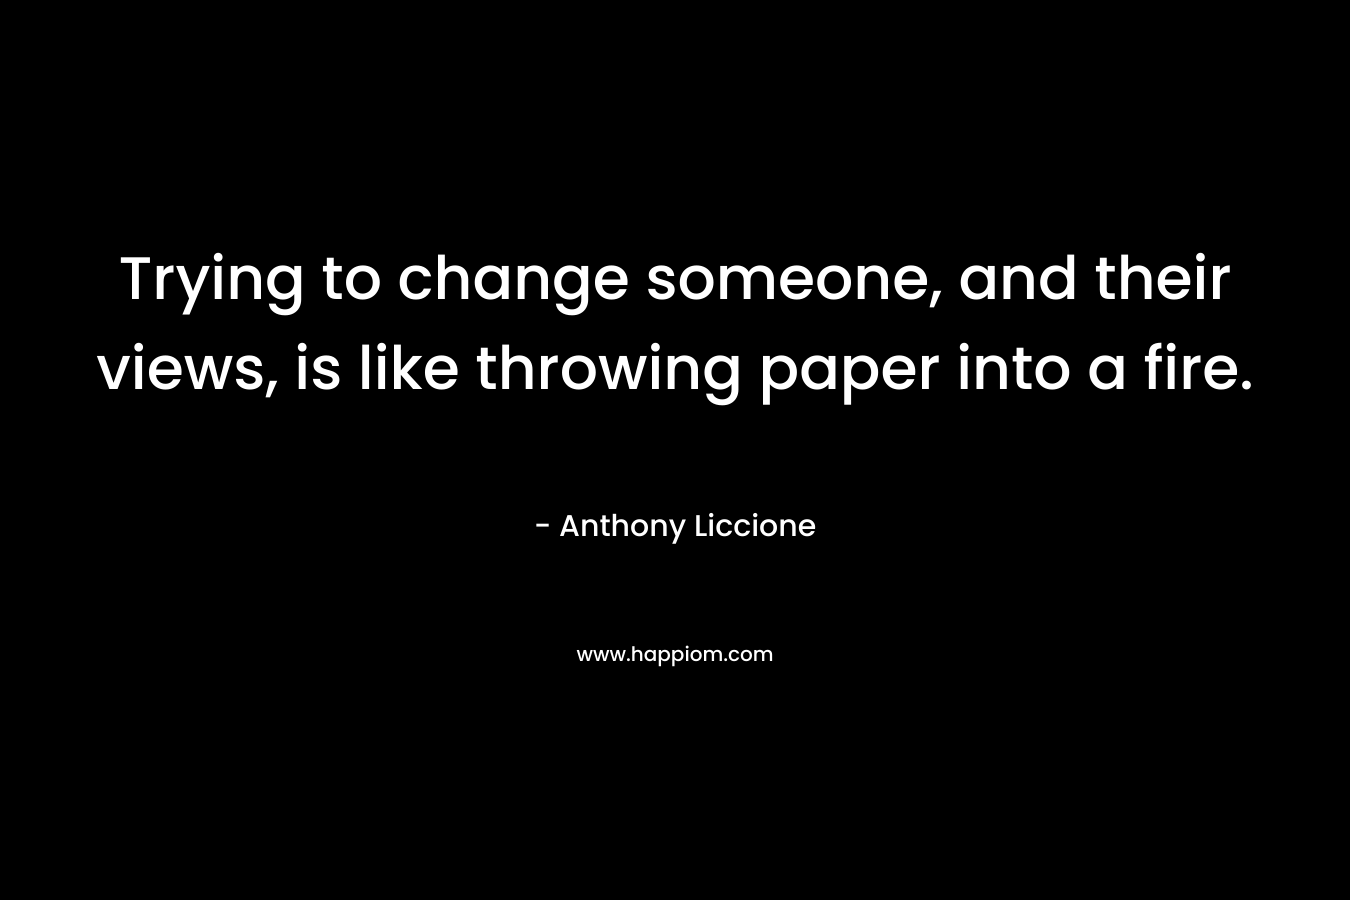 Trying to change someone, and their views, is like throwing paper into a fire. – Anthony Liccione